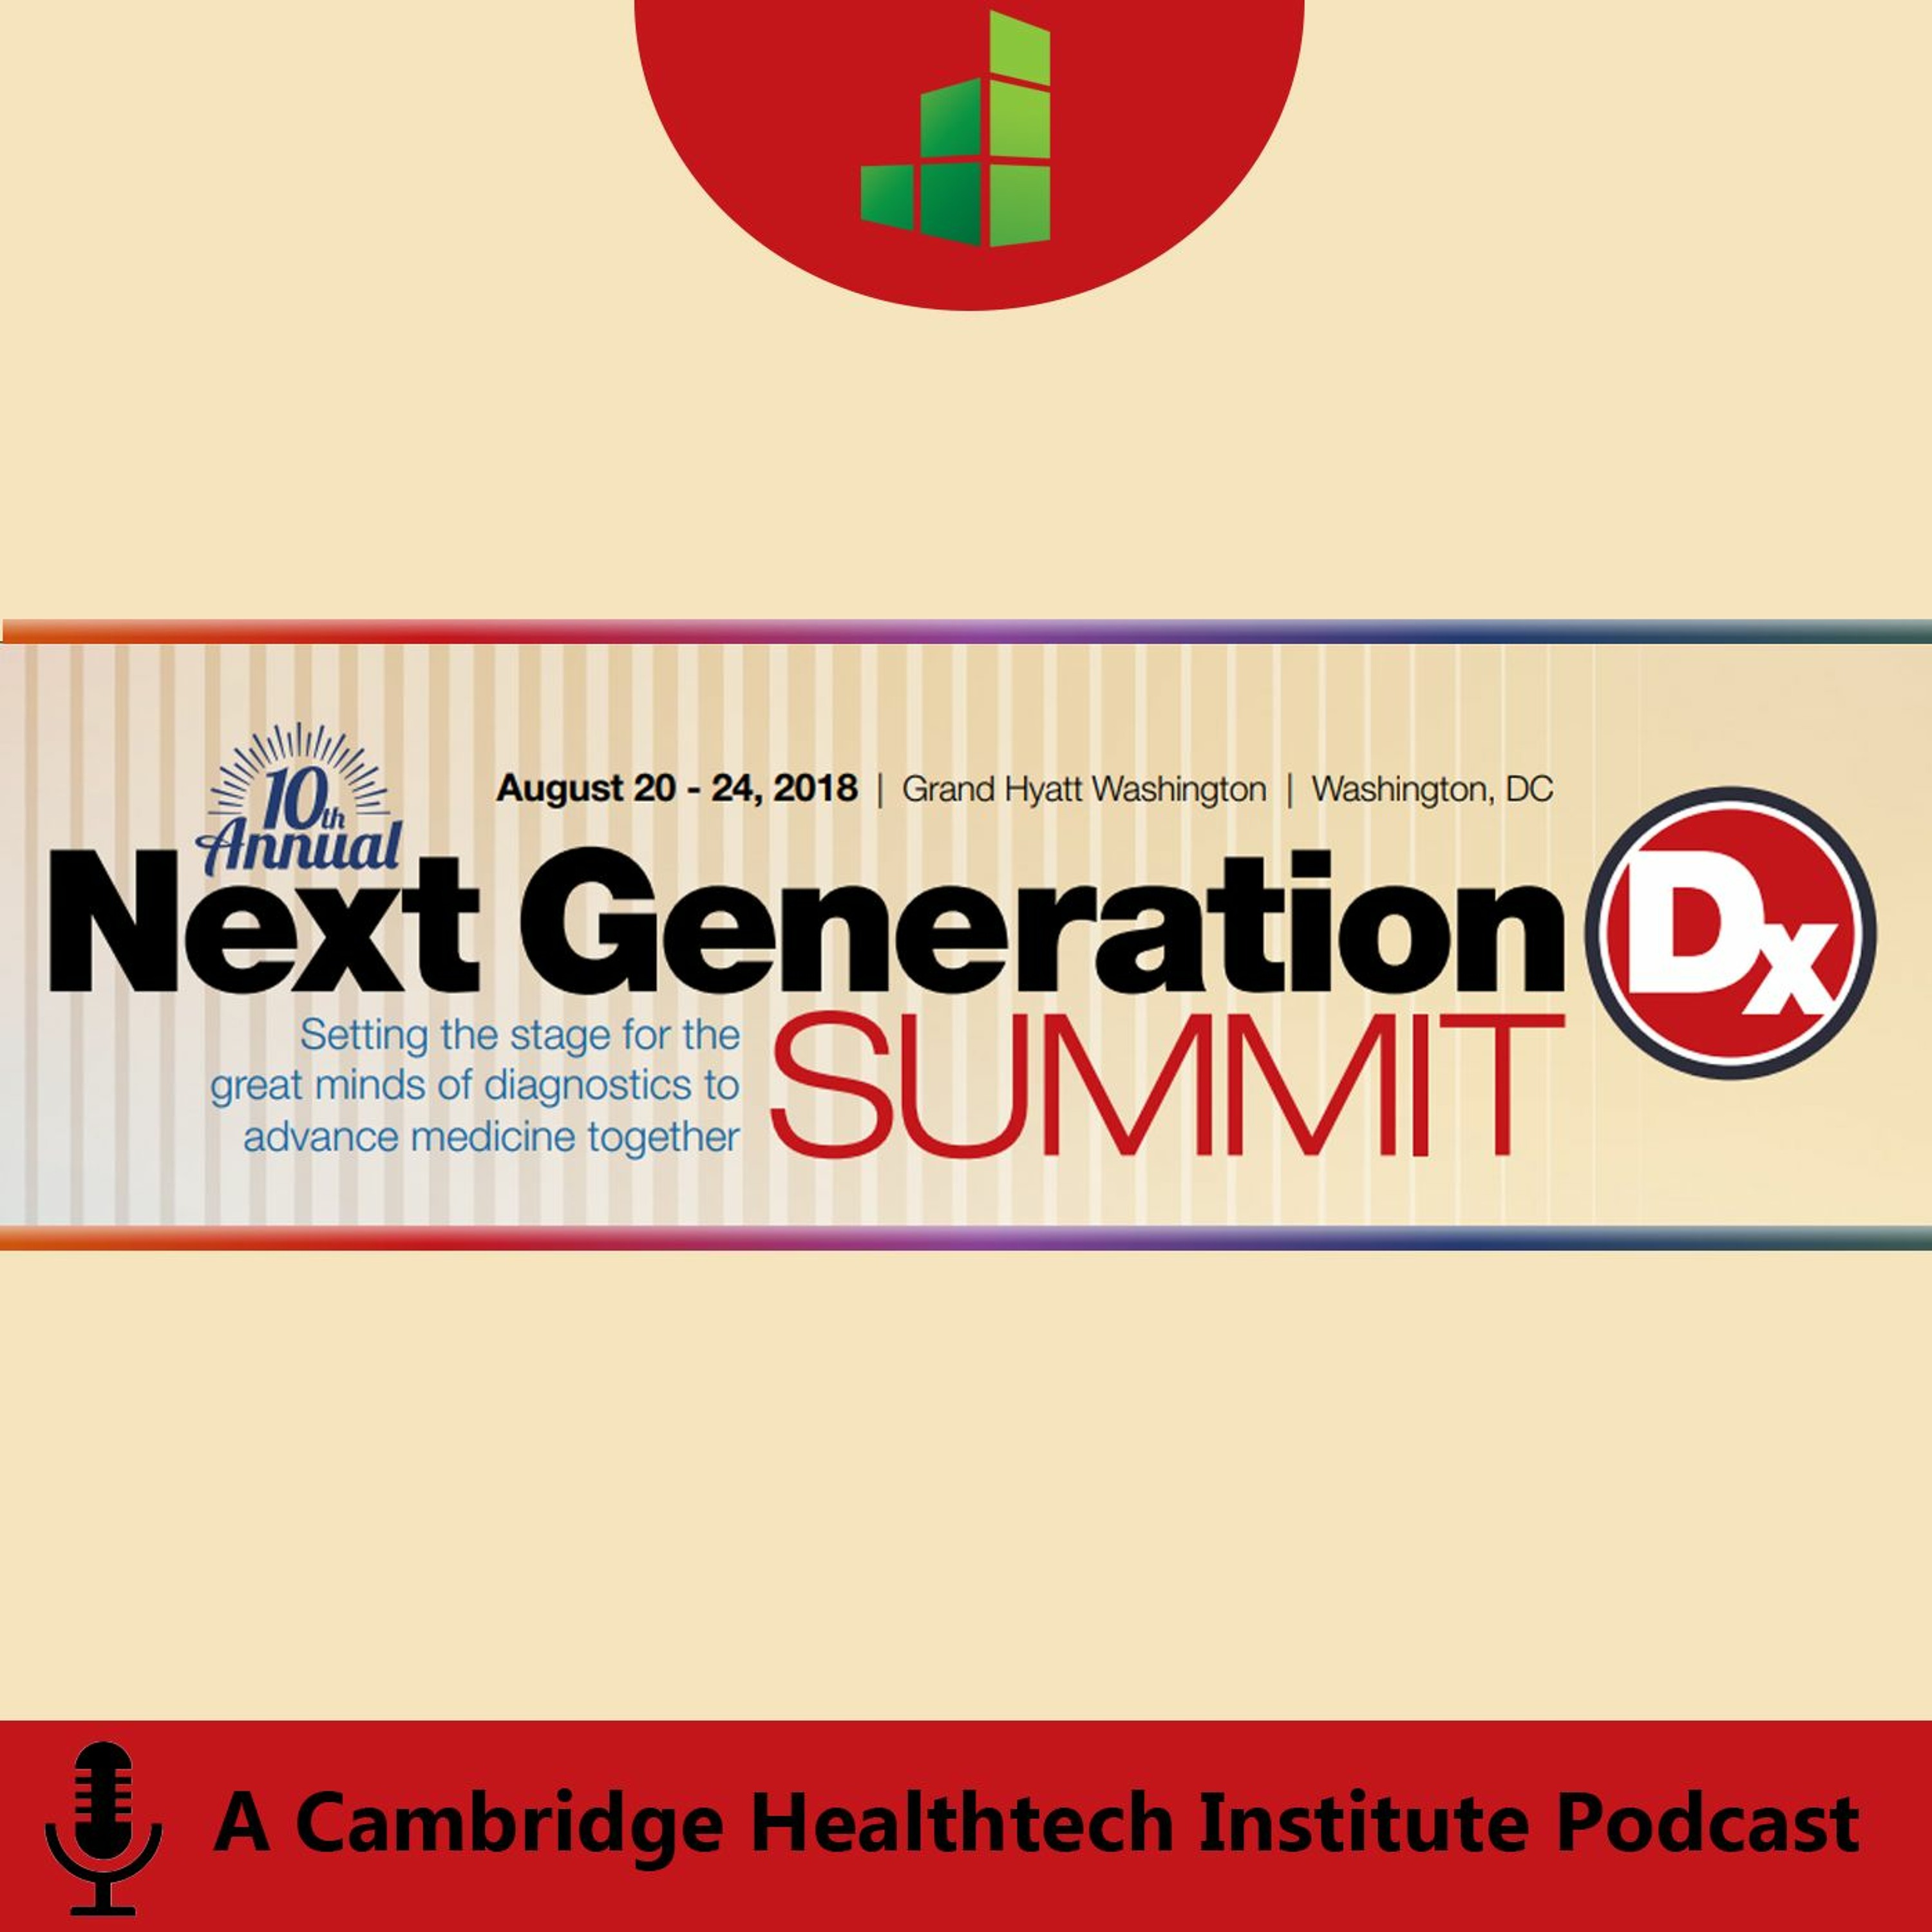 Next Generation DX Summit 2018 |  Challenges and Opportunities in Molecular Testing